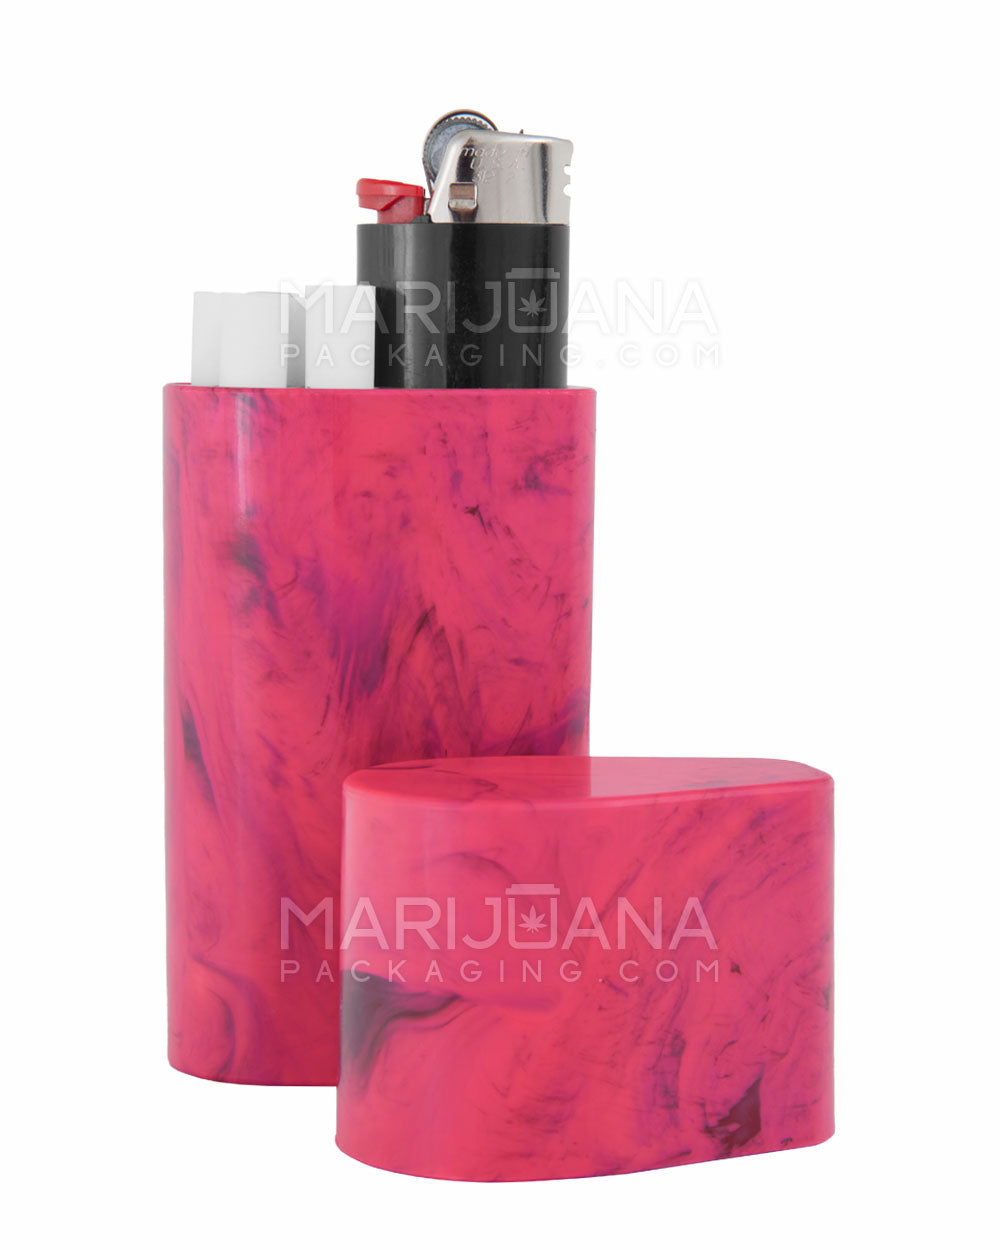 SMOKE SPACE | Marble Pre-Roll Joint Case | 100mm x 54mm - Black & Pink - 84mm Capacity - 1